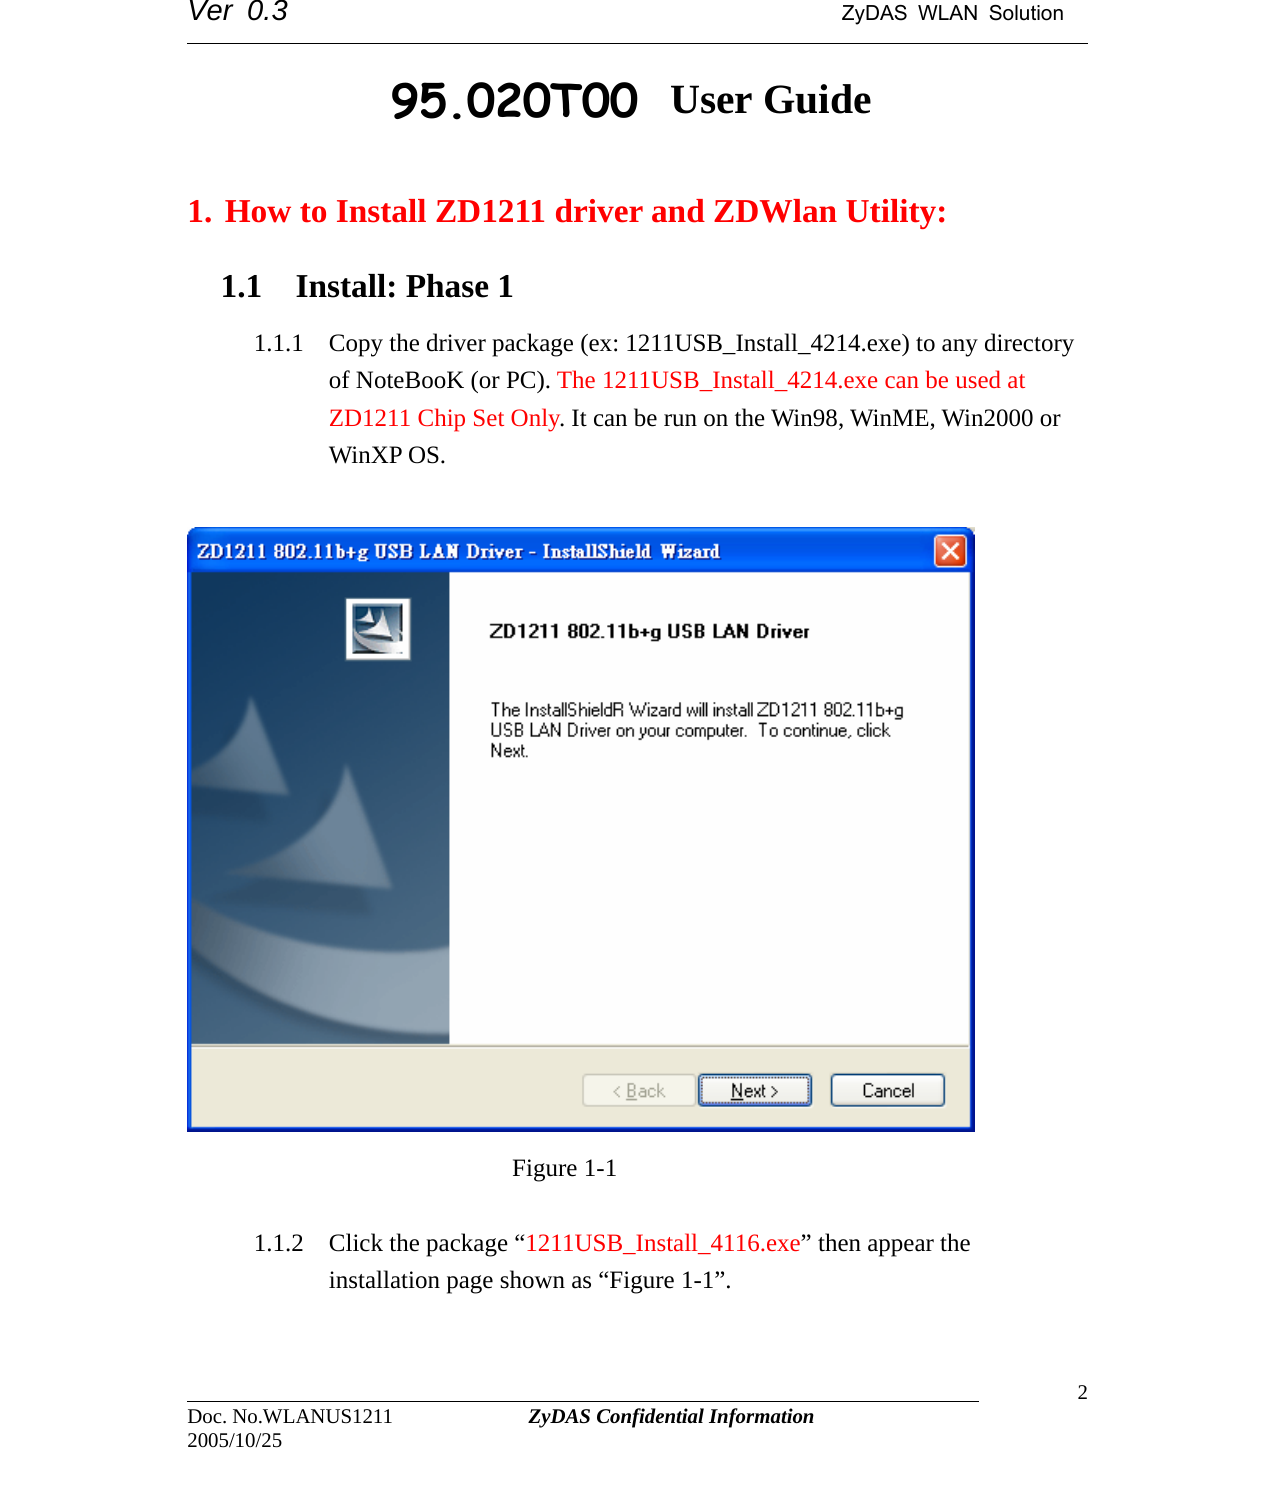 Ver 0.3                                      ZyDAS WLAN Solution                                                                                                                      ZDWlan_1211 User Guide  1. How to Install ZD1211 driver and ZDWlan Utility: 1.1 Install: Phase 1   1.1.1 Copy the driver package (ex: 1211USB_Install_4214.exe) to any directory of NoteBooK (or PC). The 1211USB_Install_4214.exe can be used at ZD1211 Chip Set Only. It can be run on the Win98, WinME, Win2000 or WinXP OS.                             Figure 1-1                                                                                 Doc. No.WLANUS1211             ZyDAS Confidential Information                   2 2005/10/25 1.1.2 Click the package “1211USB_Install_4116.exe” then appear the installation page shown as “Figure 1-1”. 95.020T00